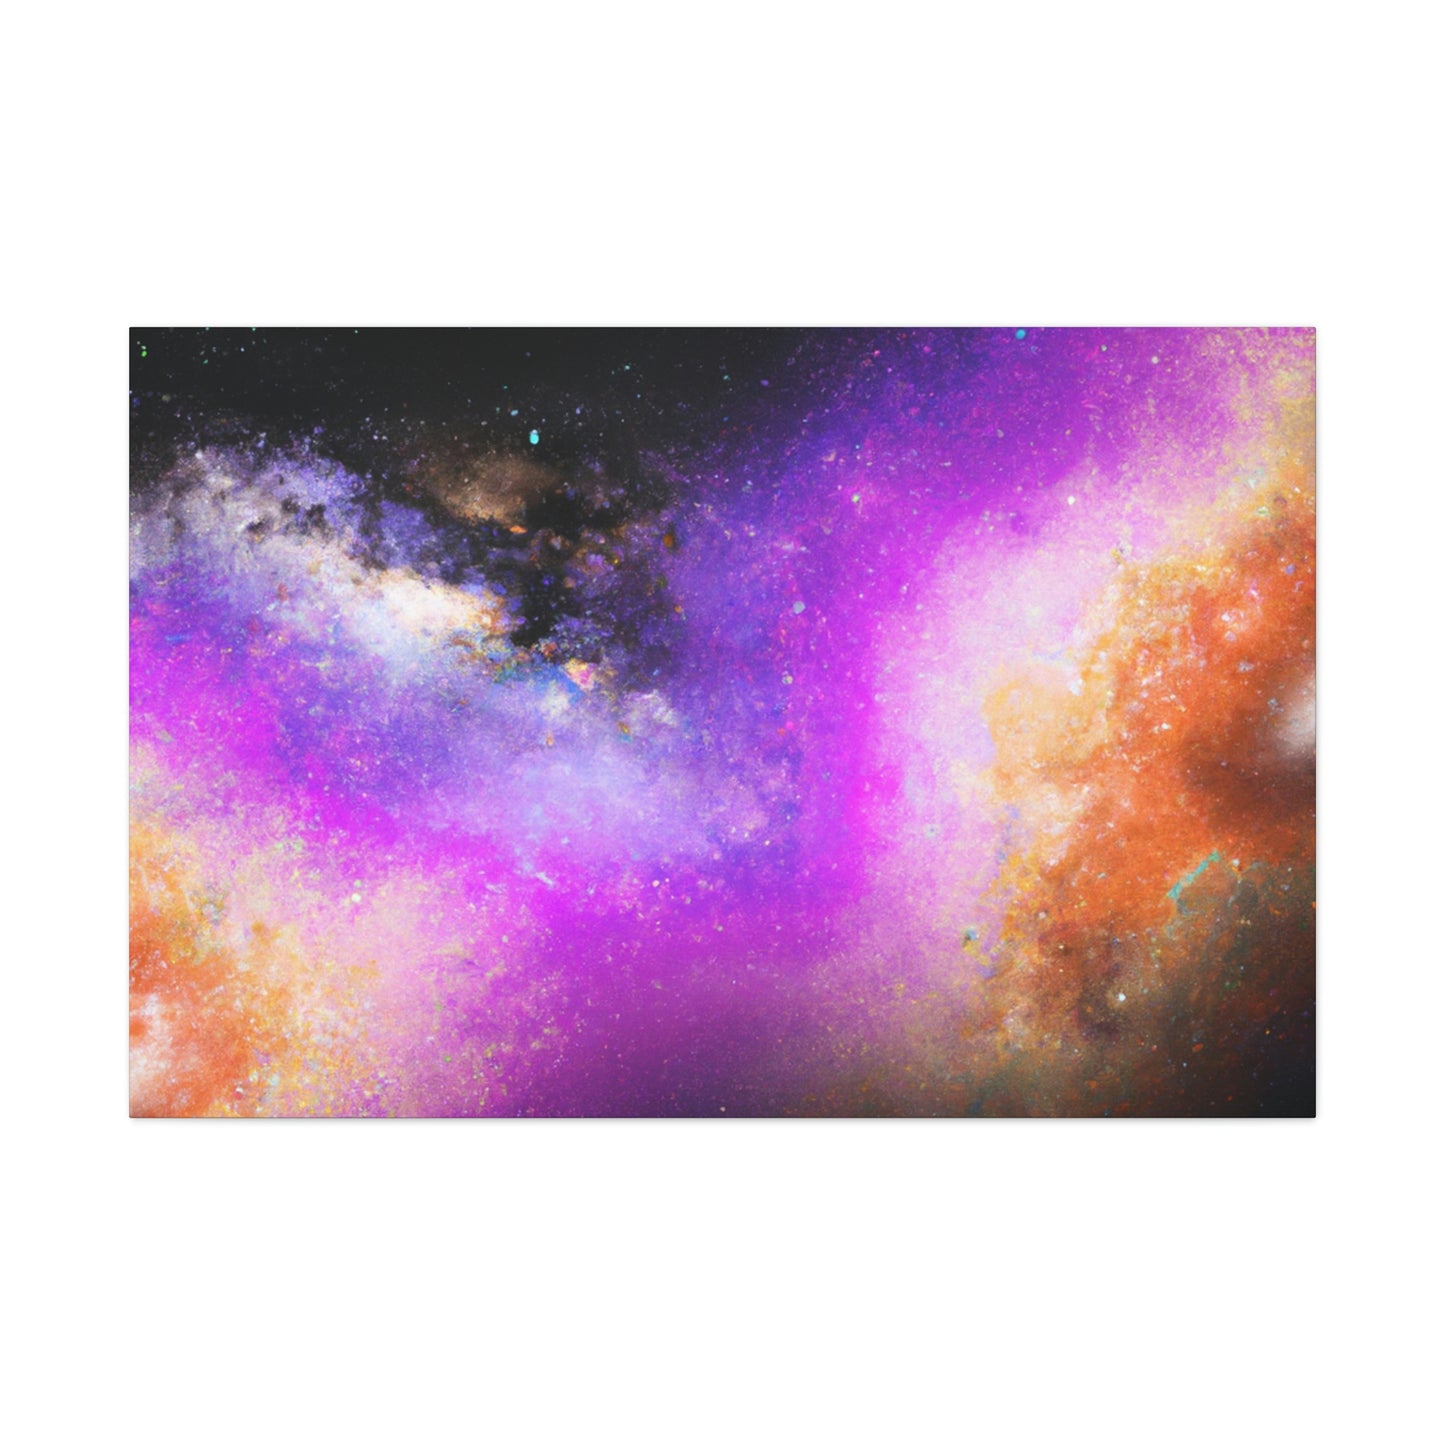 Augustine Whitlock - Astronomy Canvas Wall Art